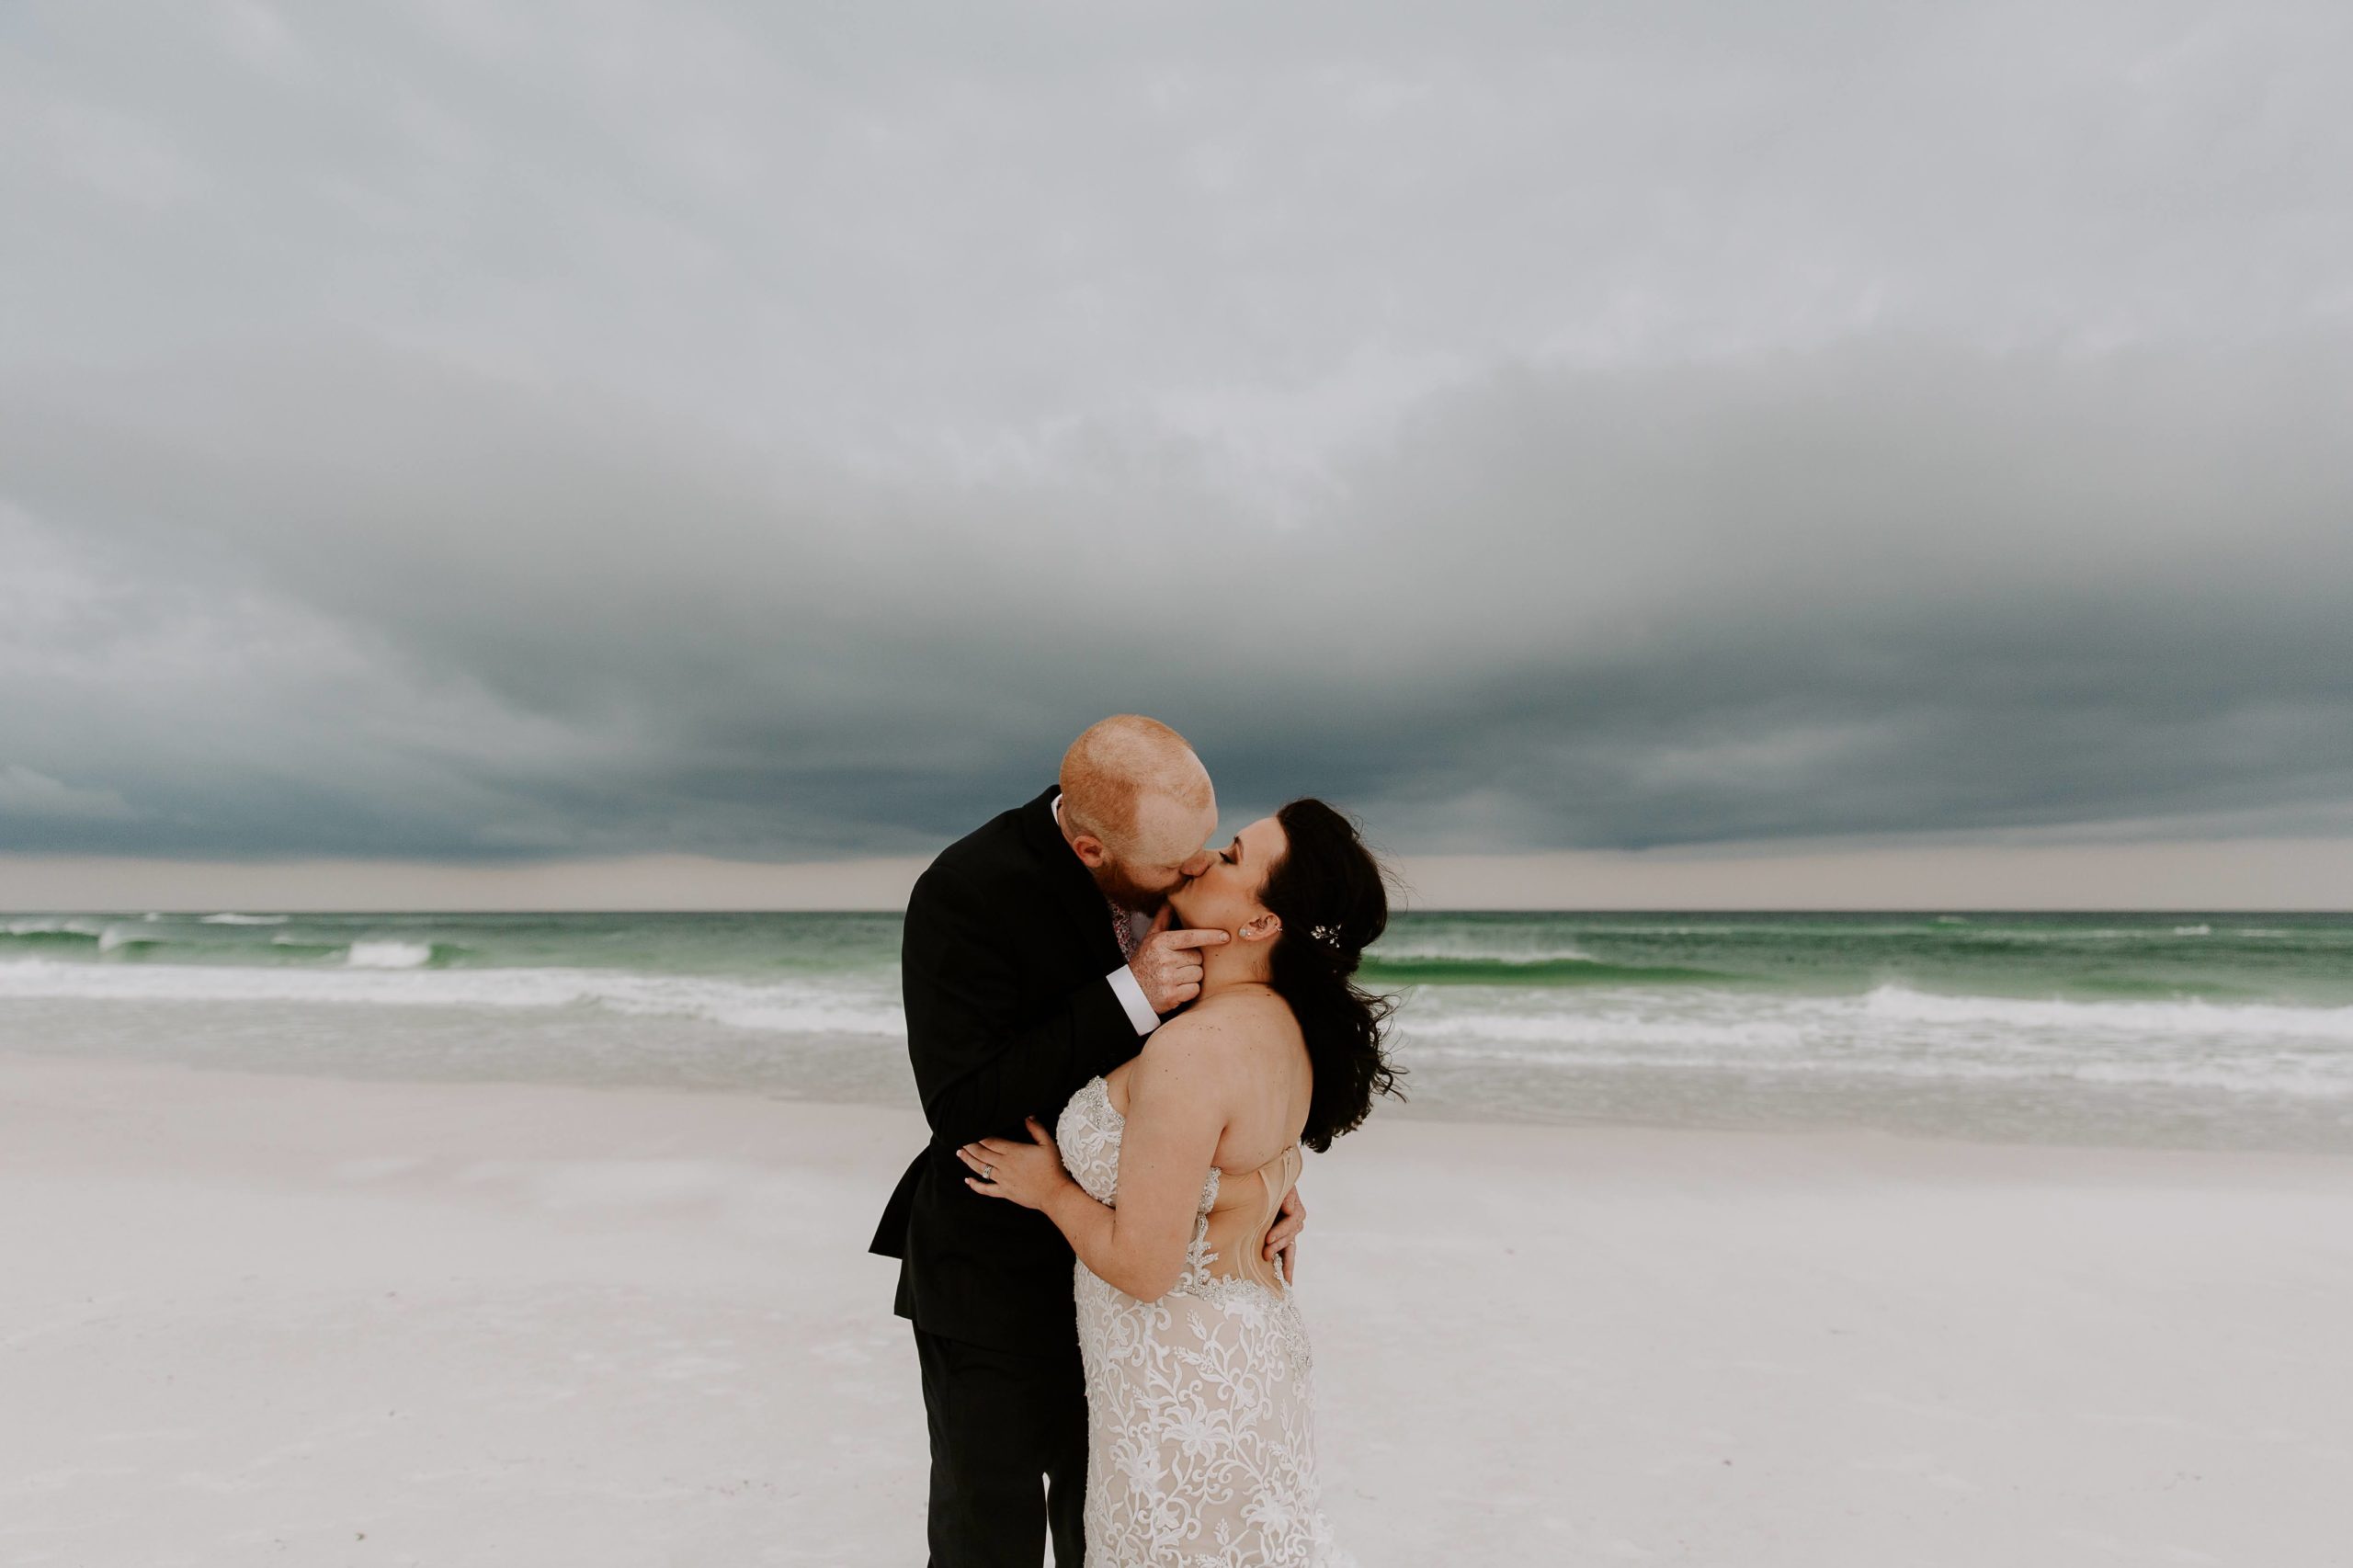 Couple sharing a kiss with a dramatic storm brewing in the background during their one year vow renewal